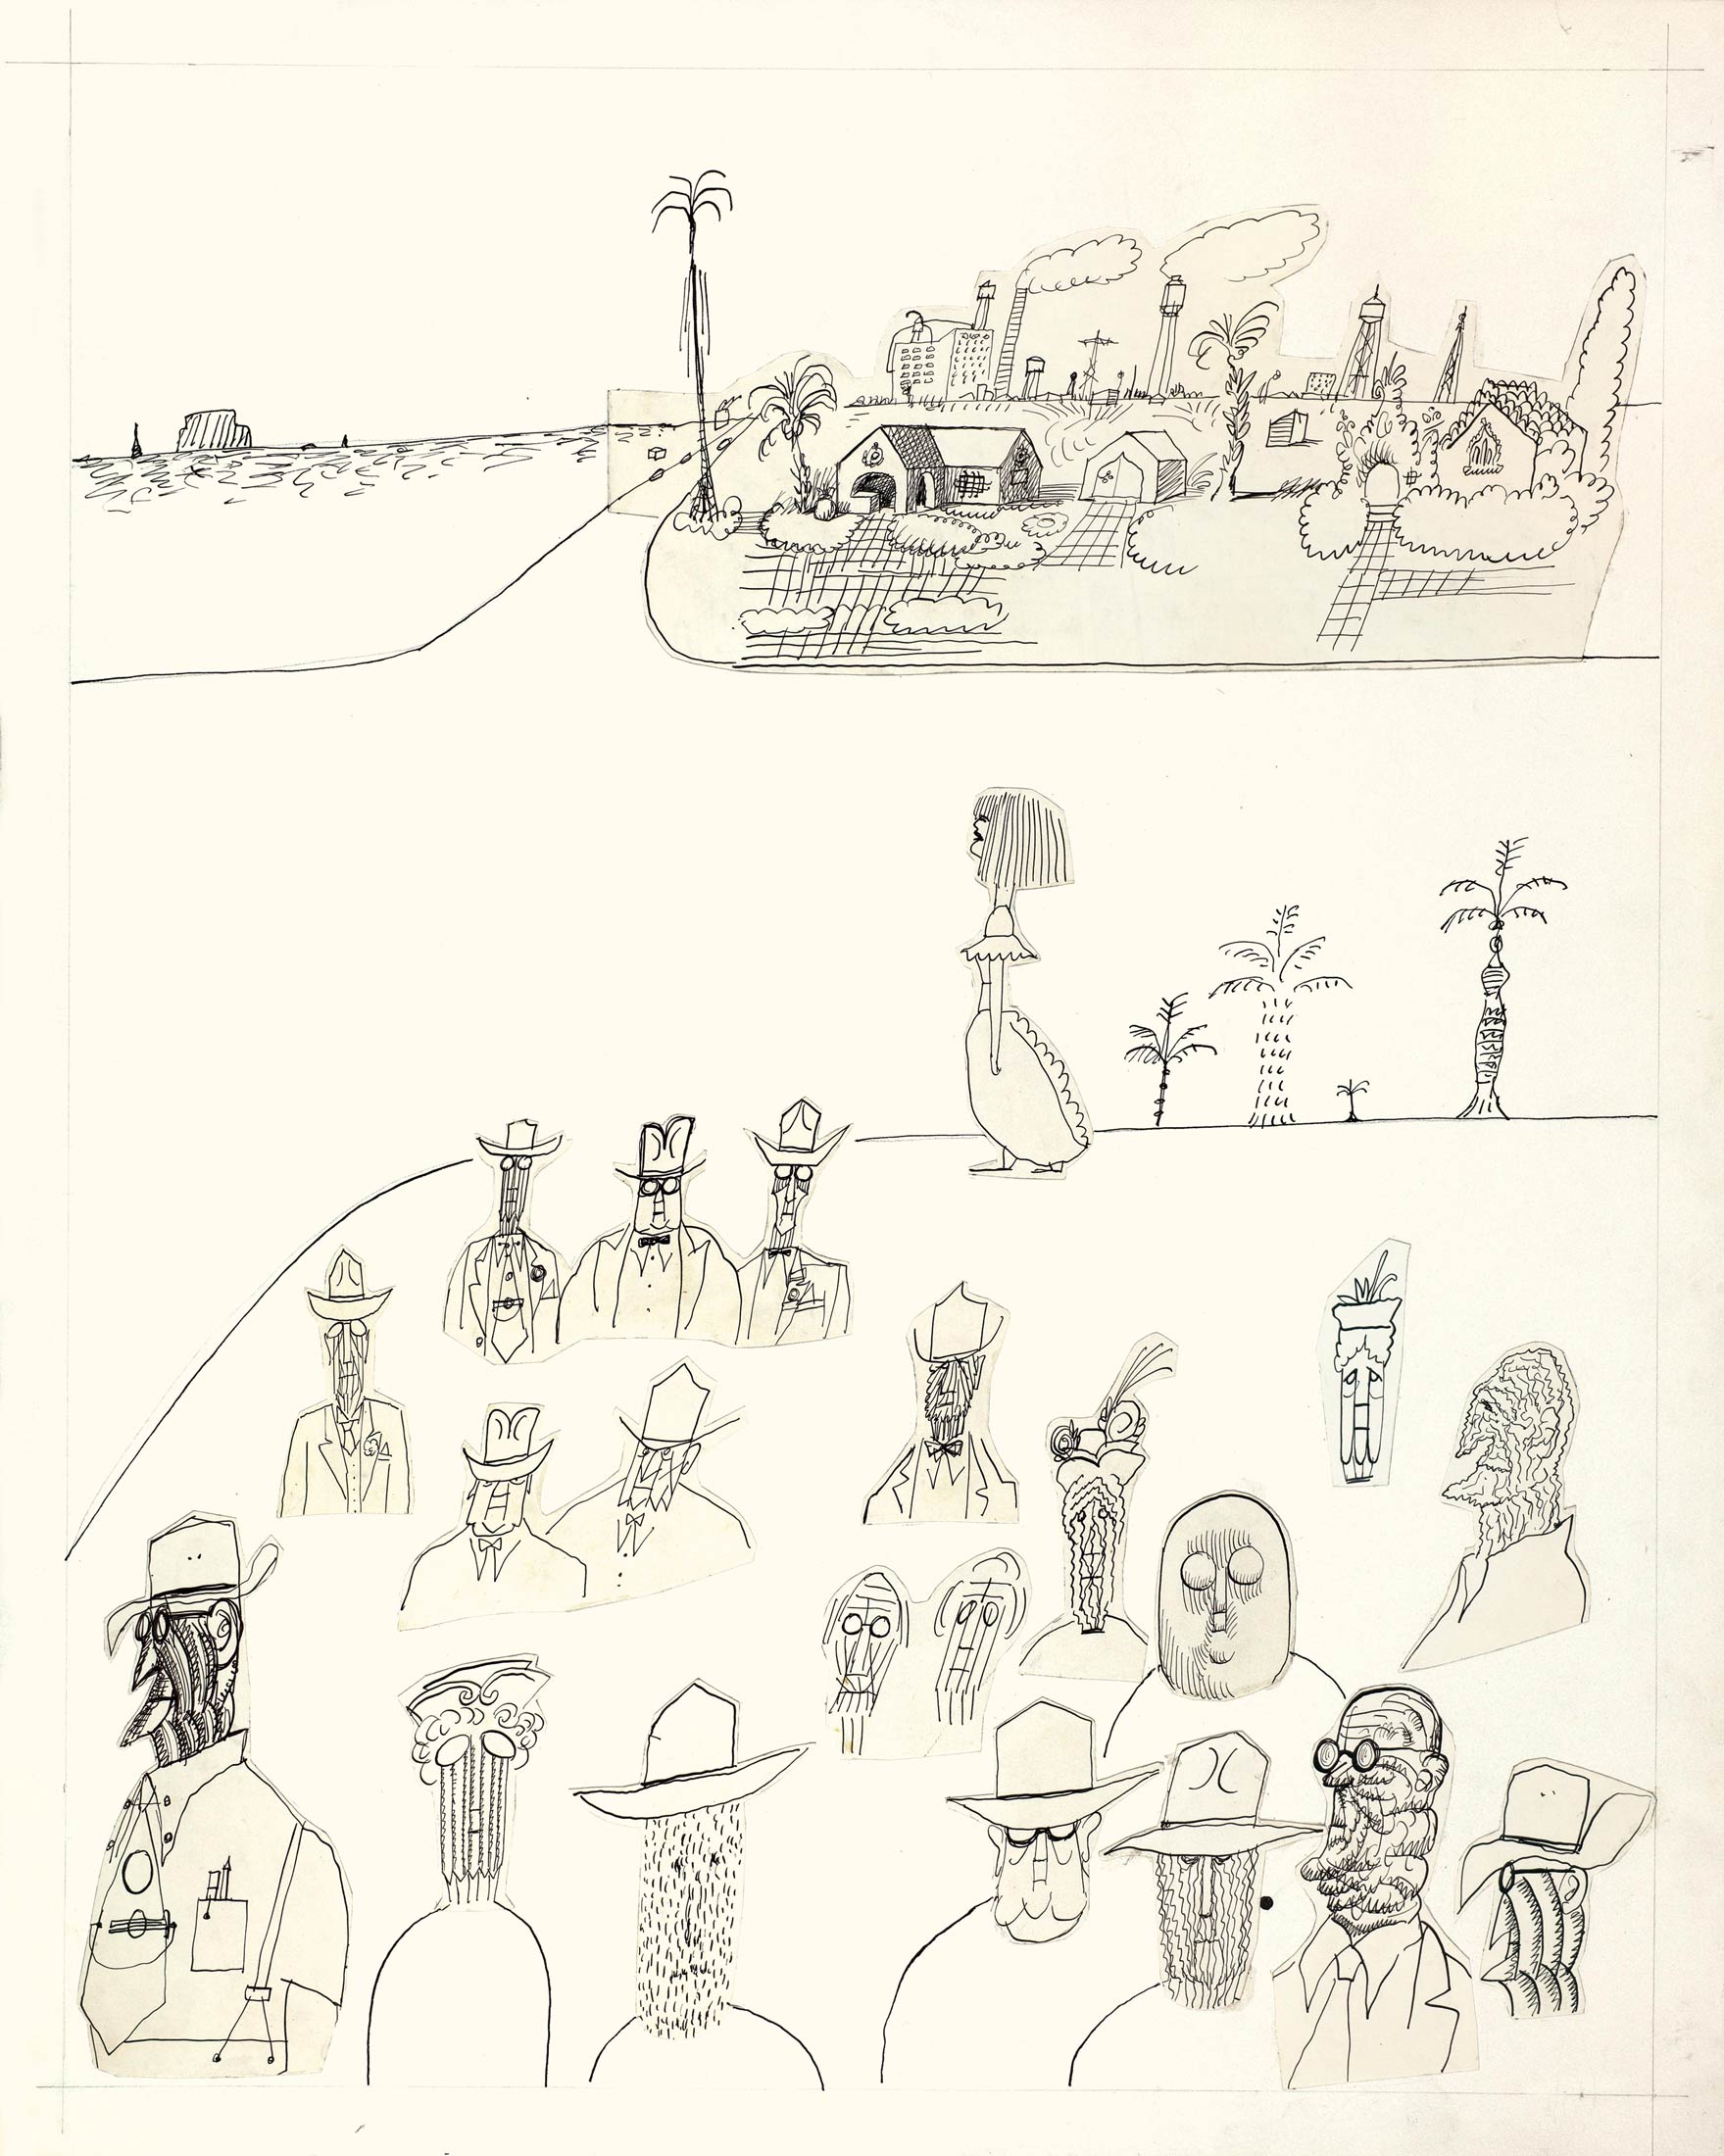 <em>Untitled [Florida Types]</em>, 1952. Ink and collage on paper, 30 x 24 in. The Art Institute of Chicago; Gift of The Saul Steinberg Foundation.